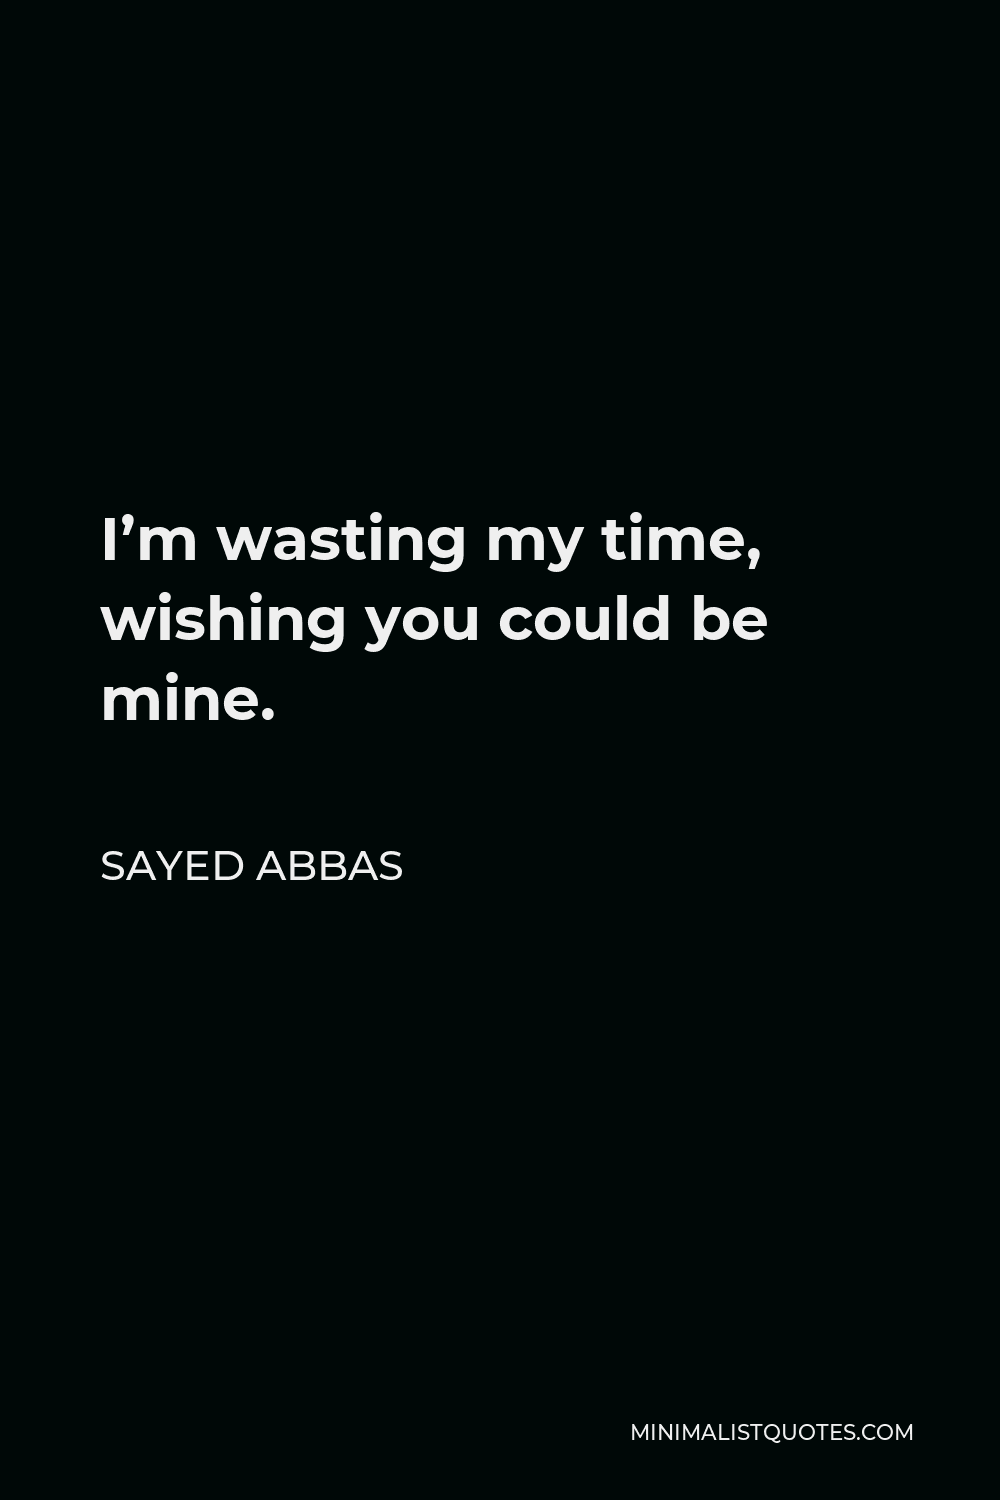 Sayed Abbas Quote - I’m wasting my time, wishing you could be mine.